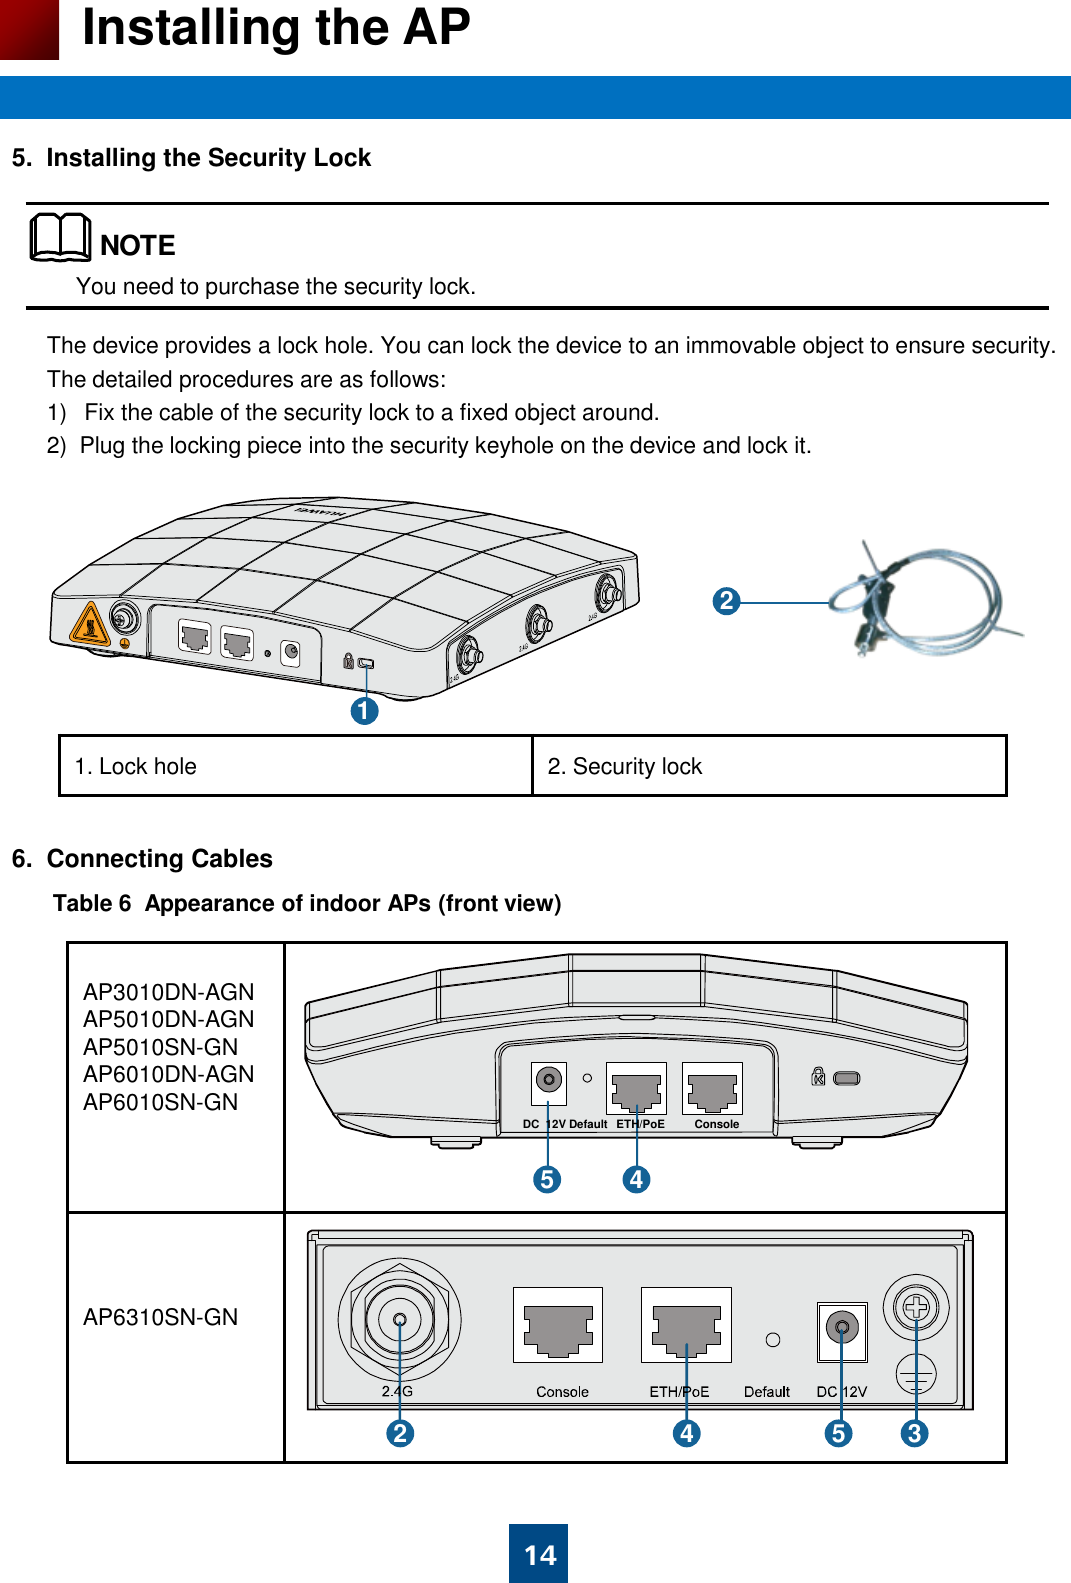 6.  Connecting Cables                                       5.  Installing the Security Lock                                       14 Installing the AP You need to purchase the security lock. 2 1. Lock hole 2. Security lock The device provides a lock hole. You can lock the device to an immovable object to ensure security. The detailed procedures are as follows:  1) Fix the cable of the security lock to a fixed object around. 2)  Plug the locking piece into the security keyhole on the device and lock it. Table 6  Appearance of indoor APs (front view)  AP3010DN-AGN AP5010DN-AGN AP5010SN-GN AP6010DN-AGN AP6010SN-GN      AP6310SN-GN  4 Console ETH/PoE Default  DC  12V  5 2  4  3 5 1 NOTE